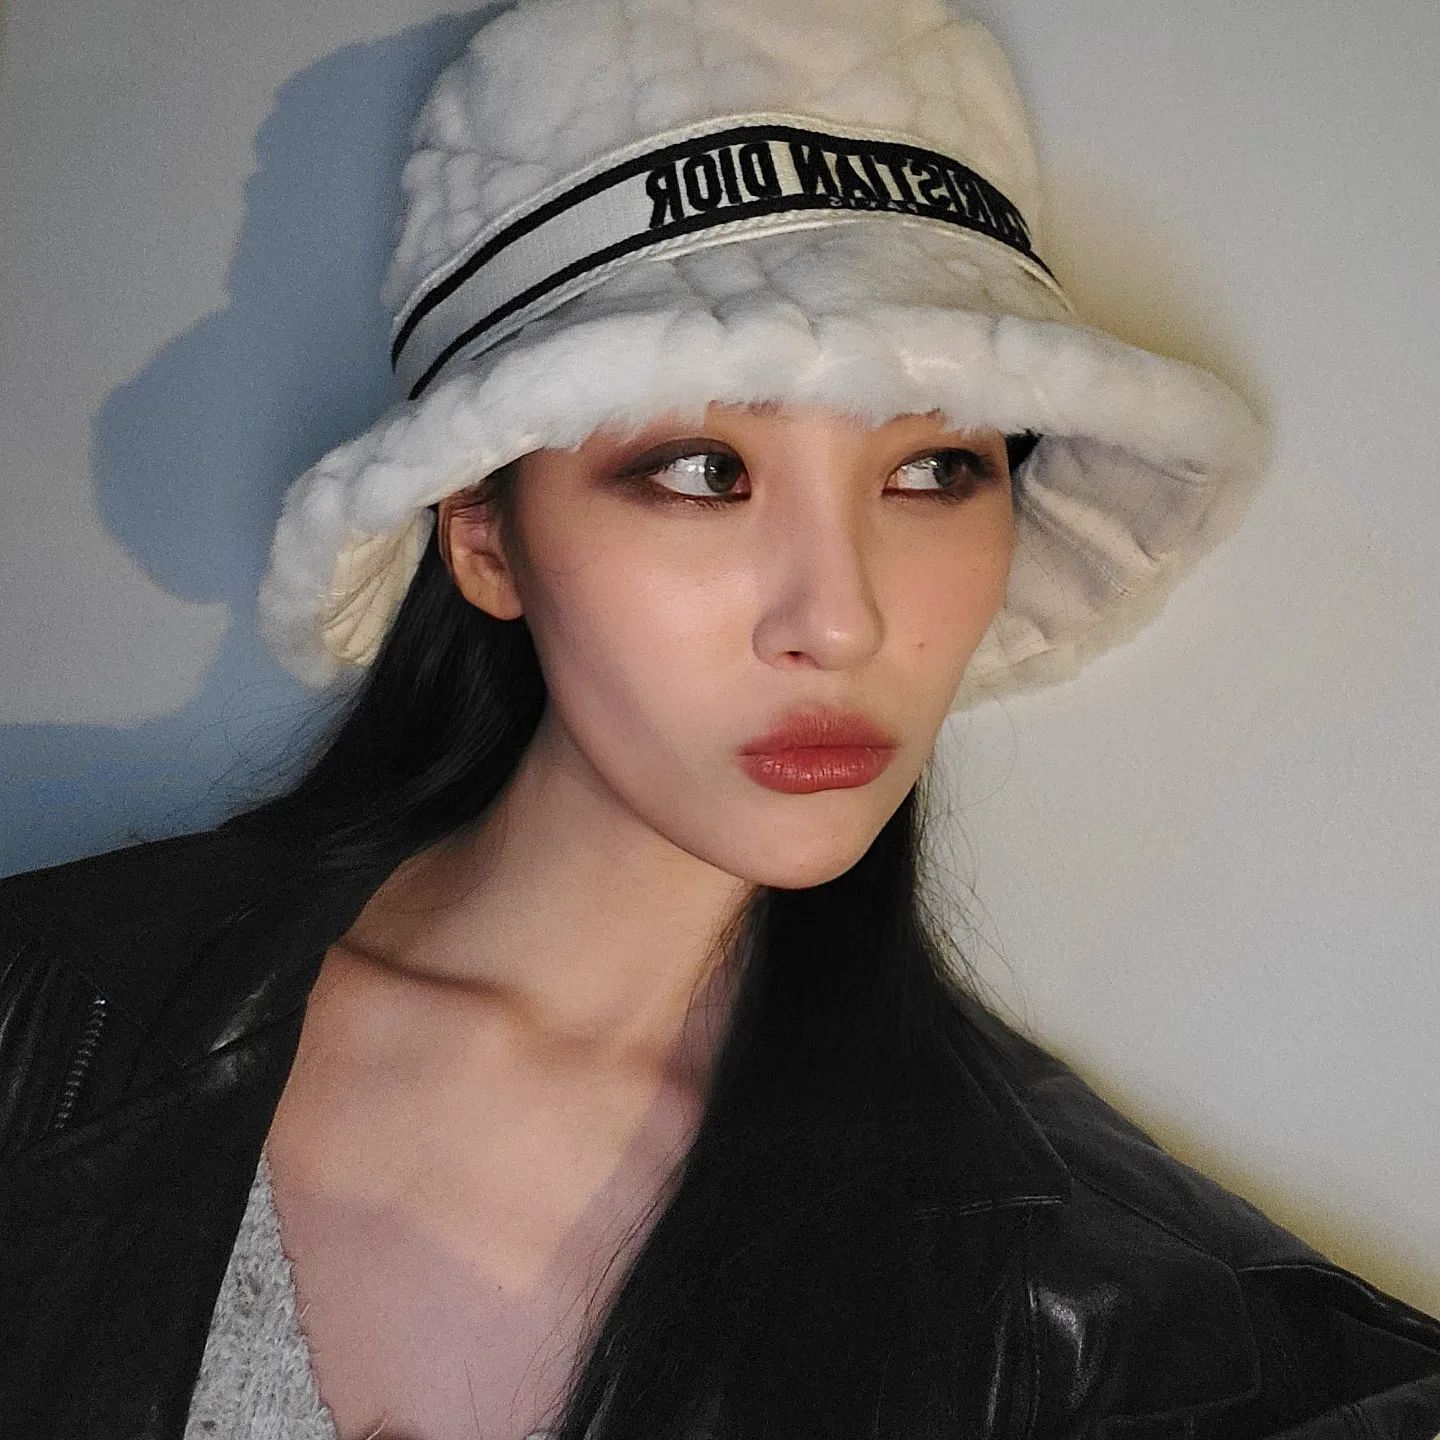 Sunmi, styled with a hat